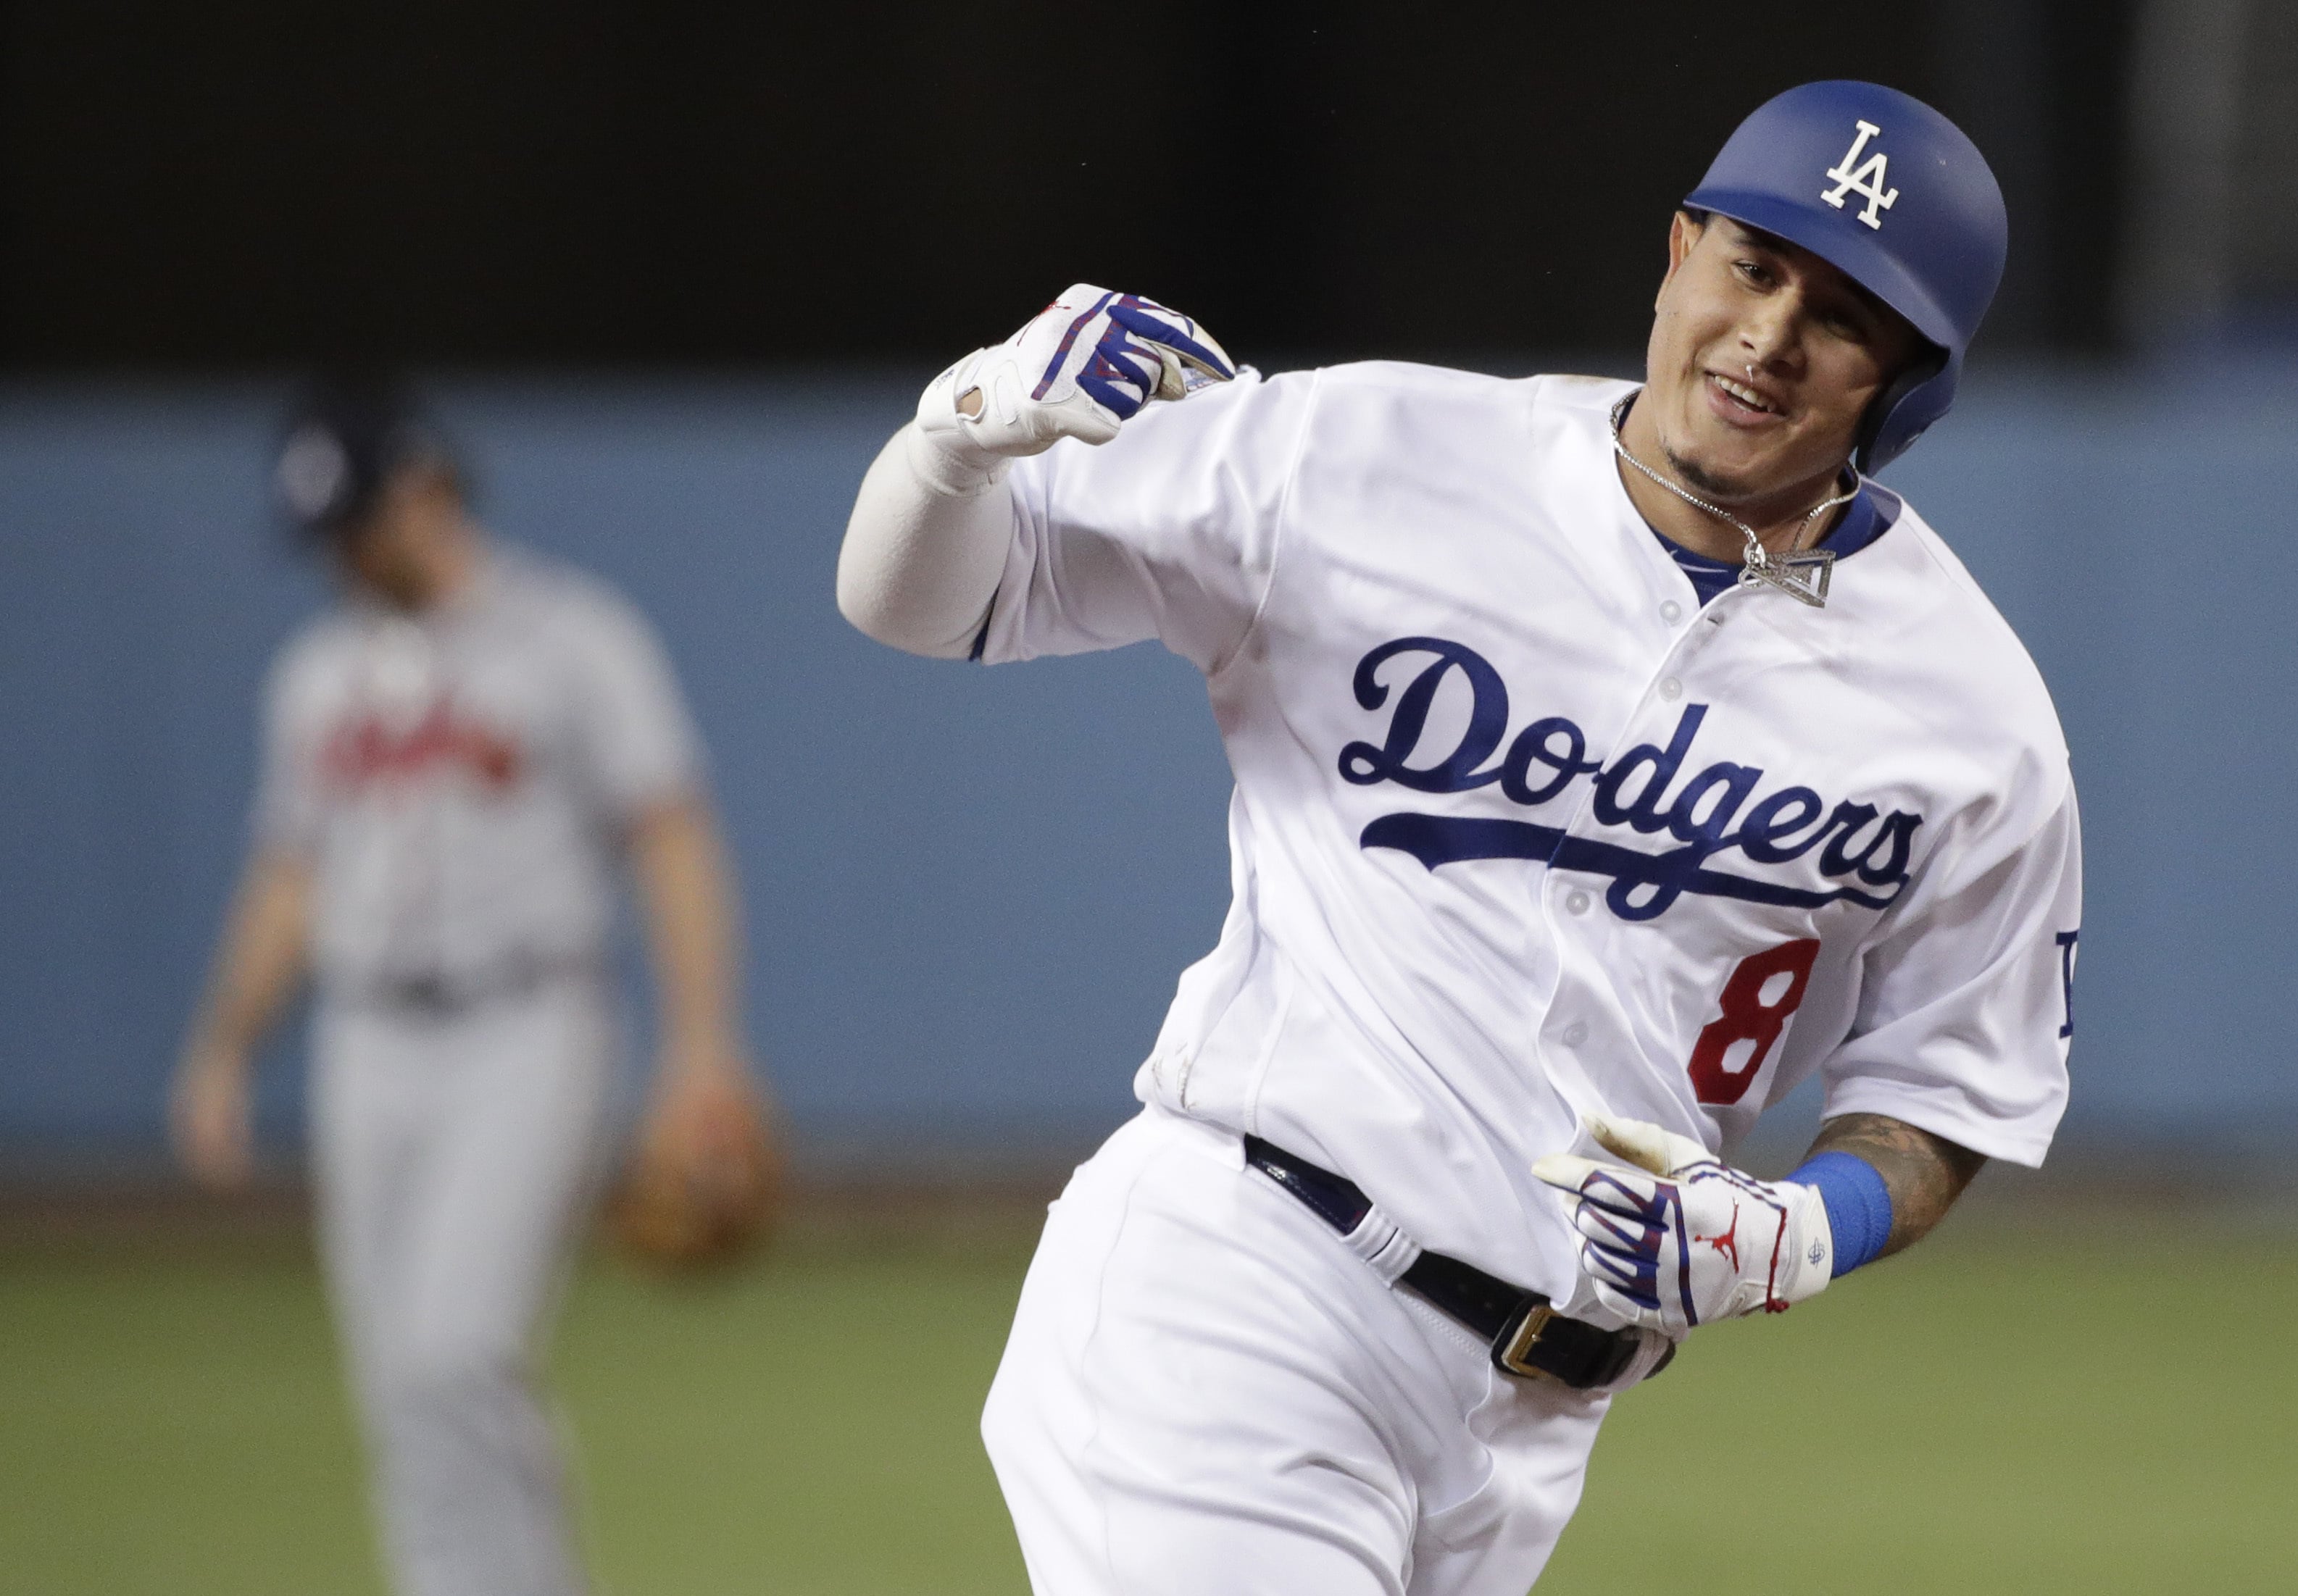 Manny Machado has agreed to a $300 million, 10-year deal with the rebuilding San Diego Padres, the biggest contract ever for a free agent. The agreement reported on Tuesday, Feb. 19, 2019, was subject to a successful physical and had not been announced. (AP Photo/Jae C.